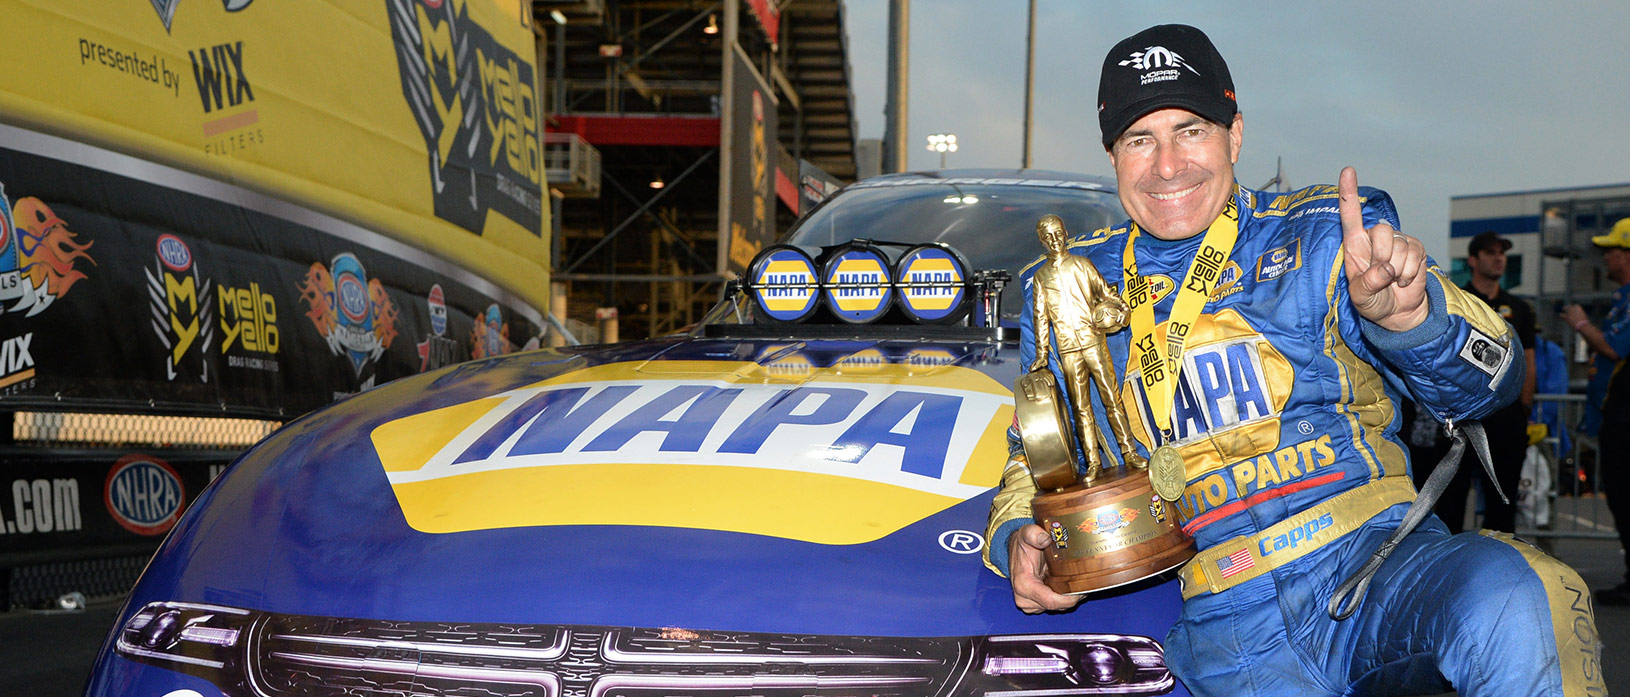 Ron Capps poses with his trophy next to his Napa Auto Parts Top Fuel Dragster race car